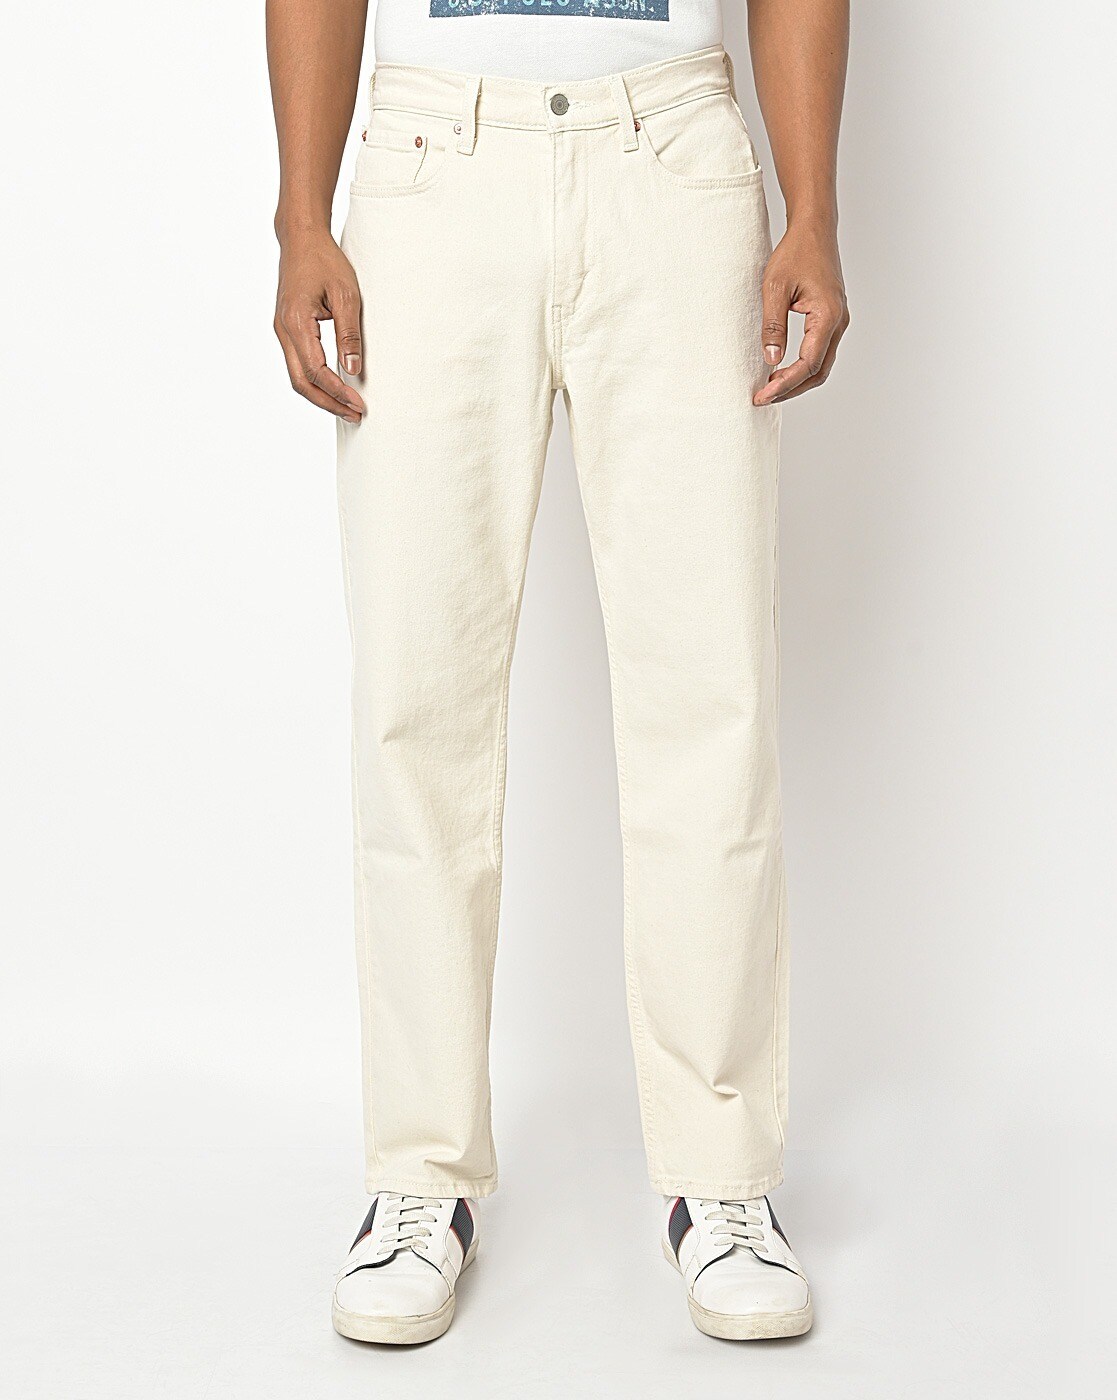 Buy Cream Trousers & Pants for Men by LEVIS Online 